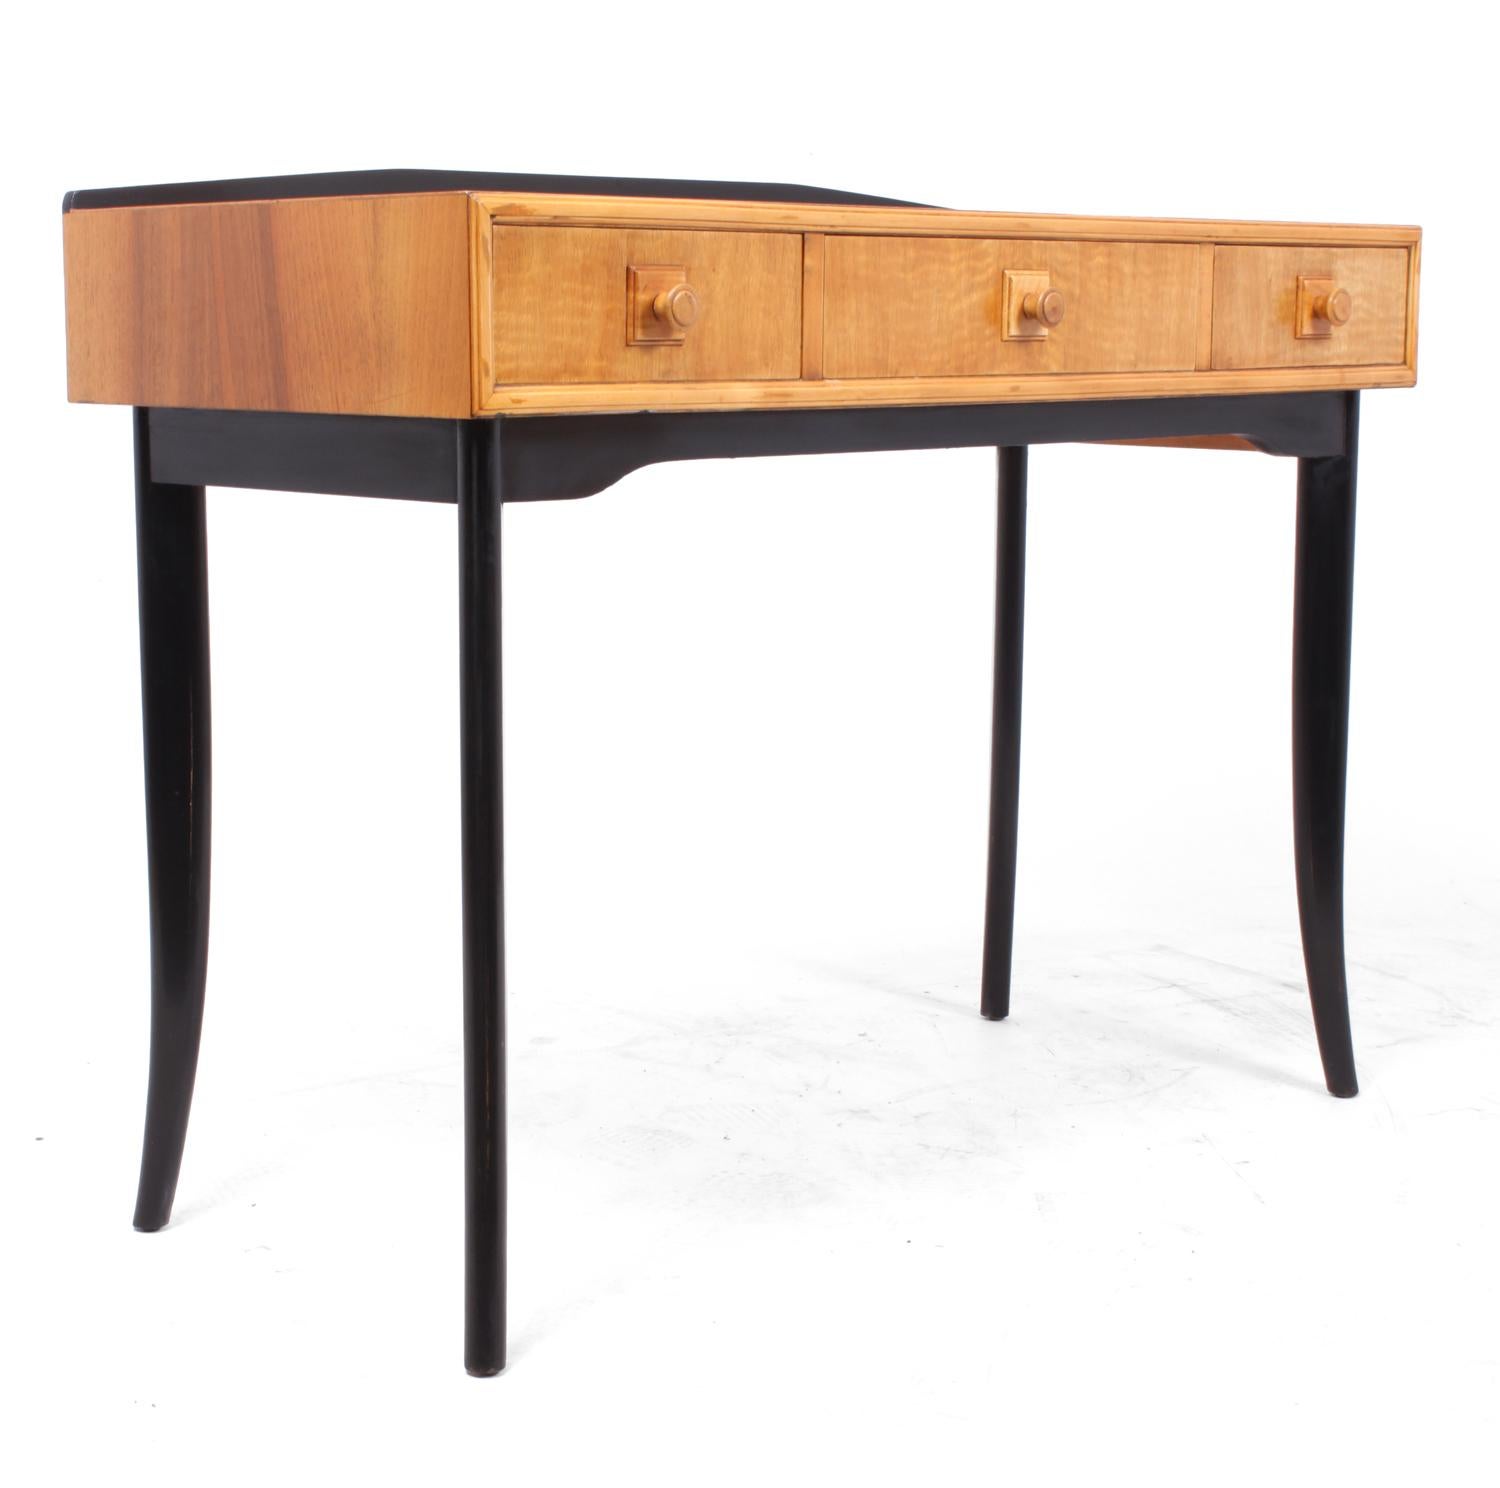 Midcentury console table, circa 1960.
A British midcentury console or side table with three drawers in maple with ebonised legs and back up-stand, this is by unknown maker but good quality with dovetail joint construction, the console table has